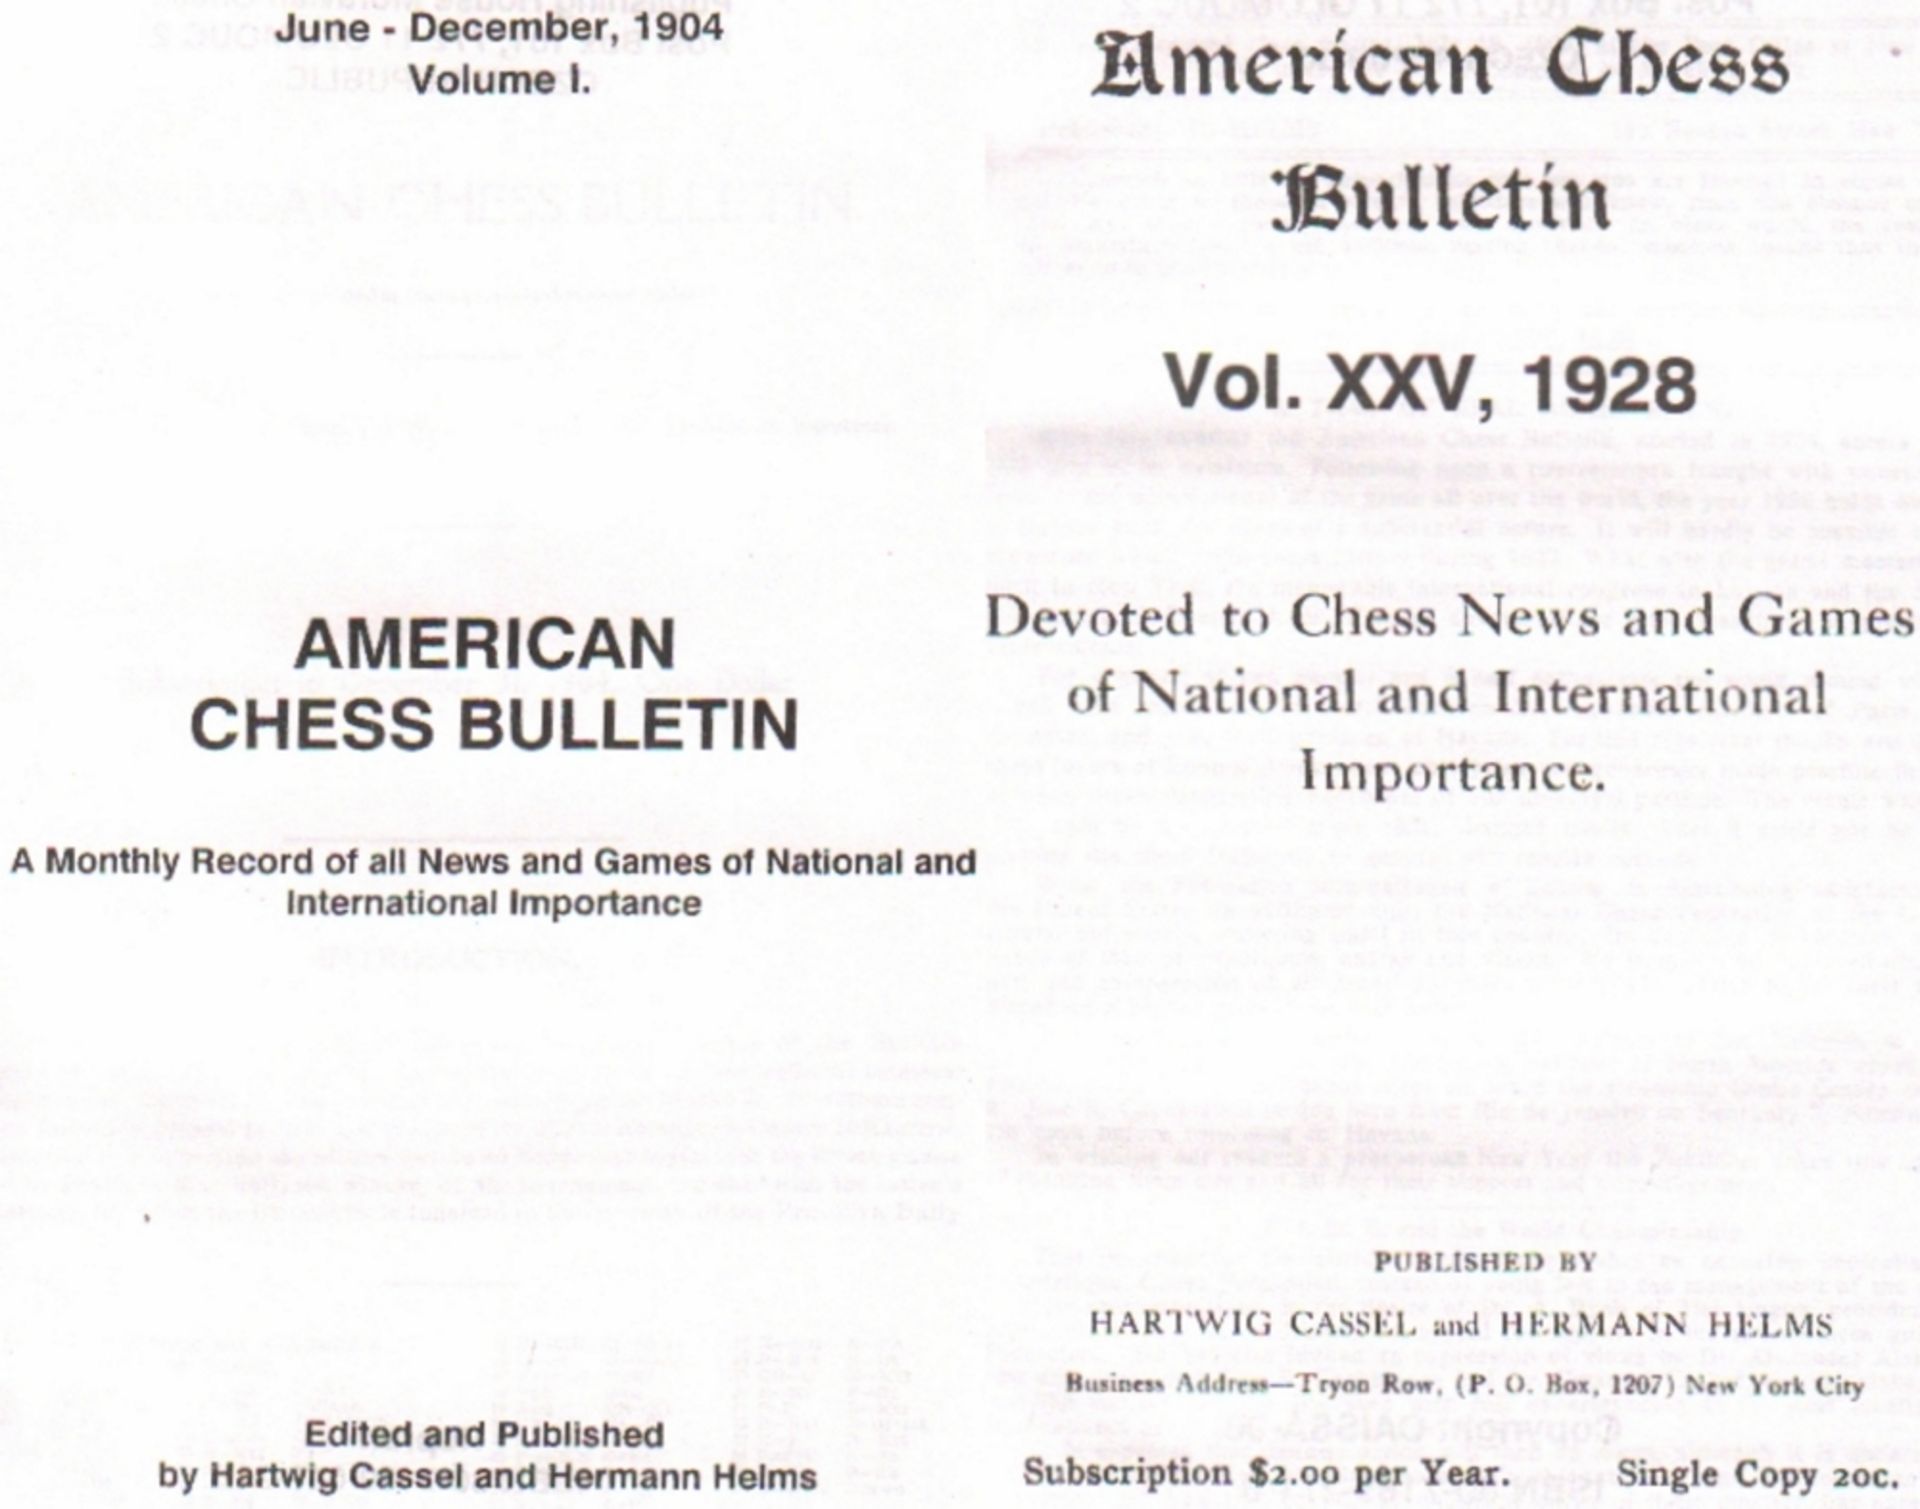 American Chess Bulletin. A Monthly Record of all News and Games of National and International